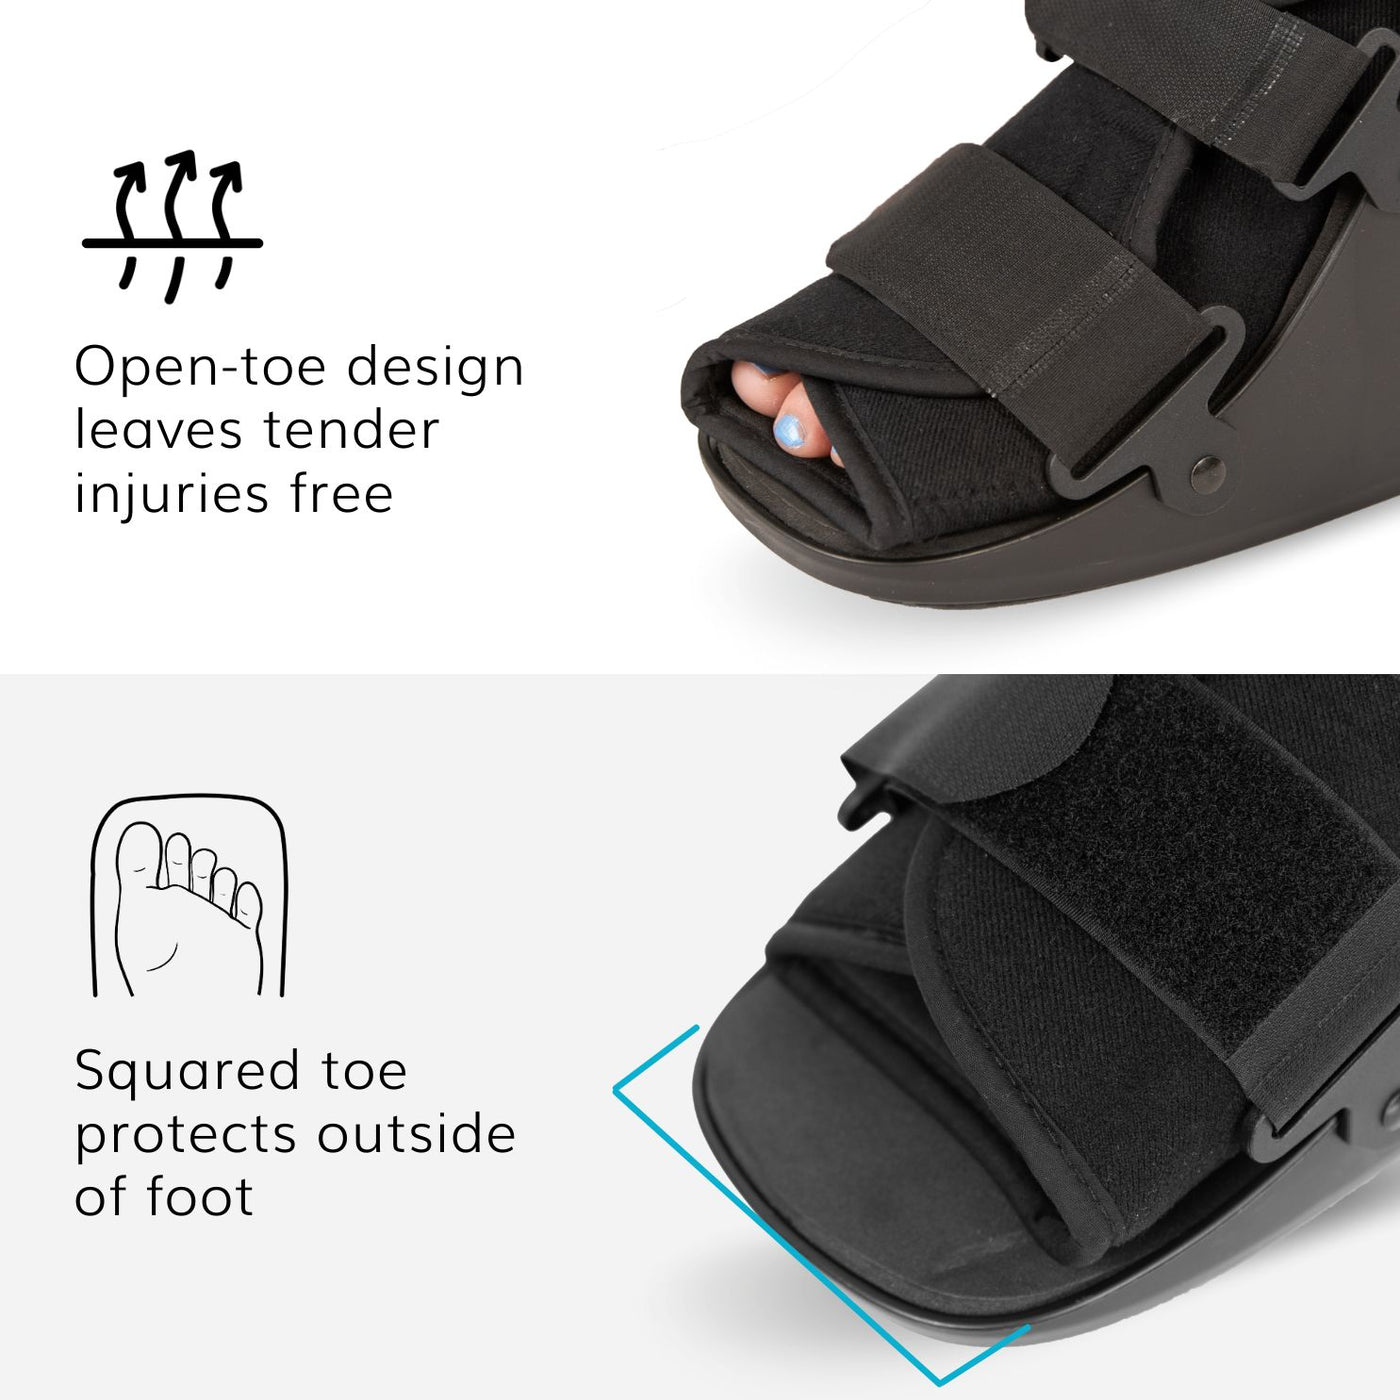 Open-toe design leaves tender injuries free while squared to protects outside of foot